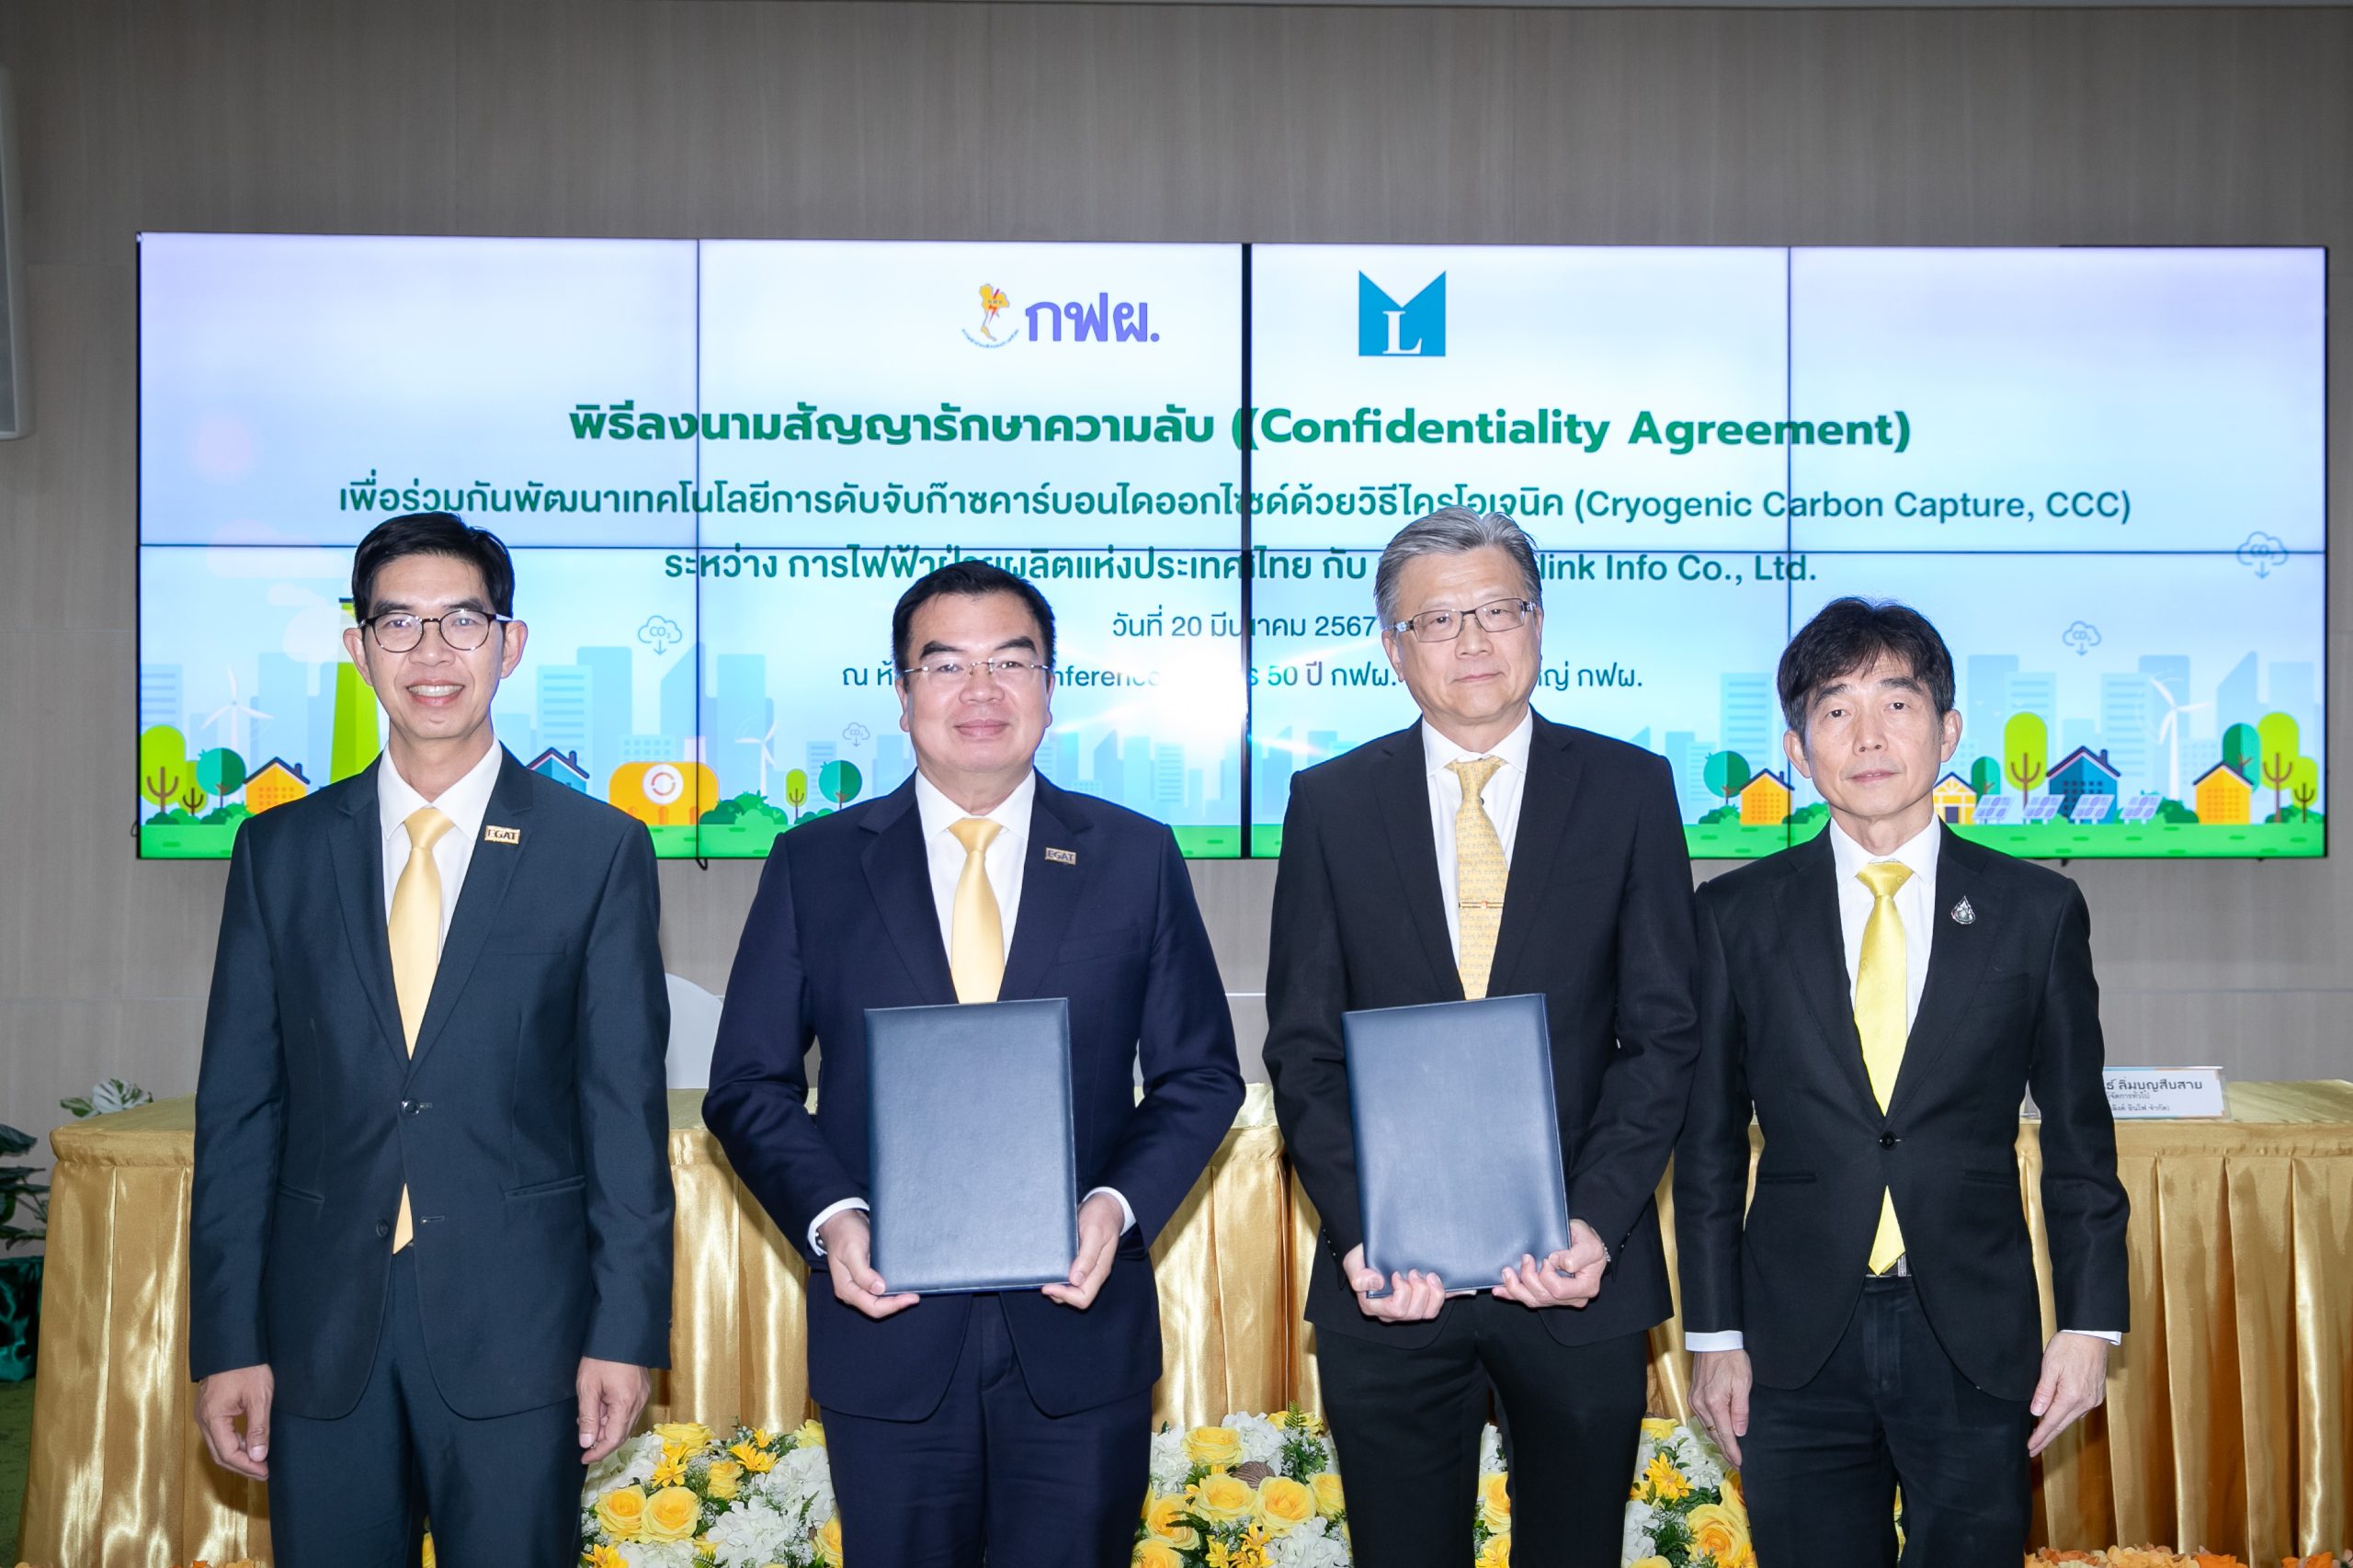 EGAT and Metlink signed CA to study Cryogenic Carbon Capture technology